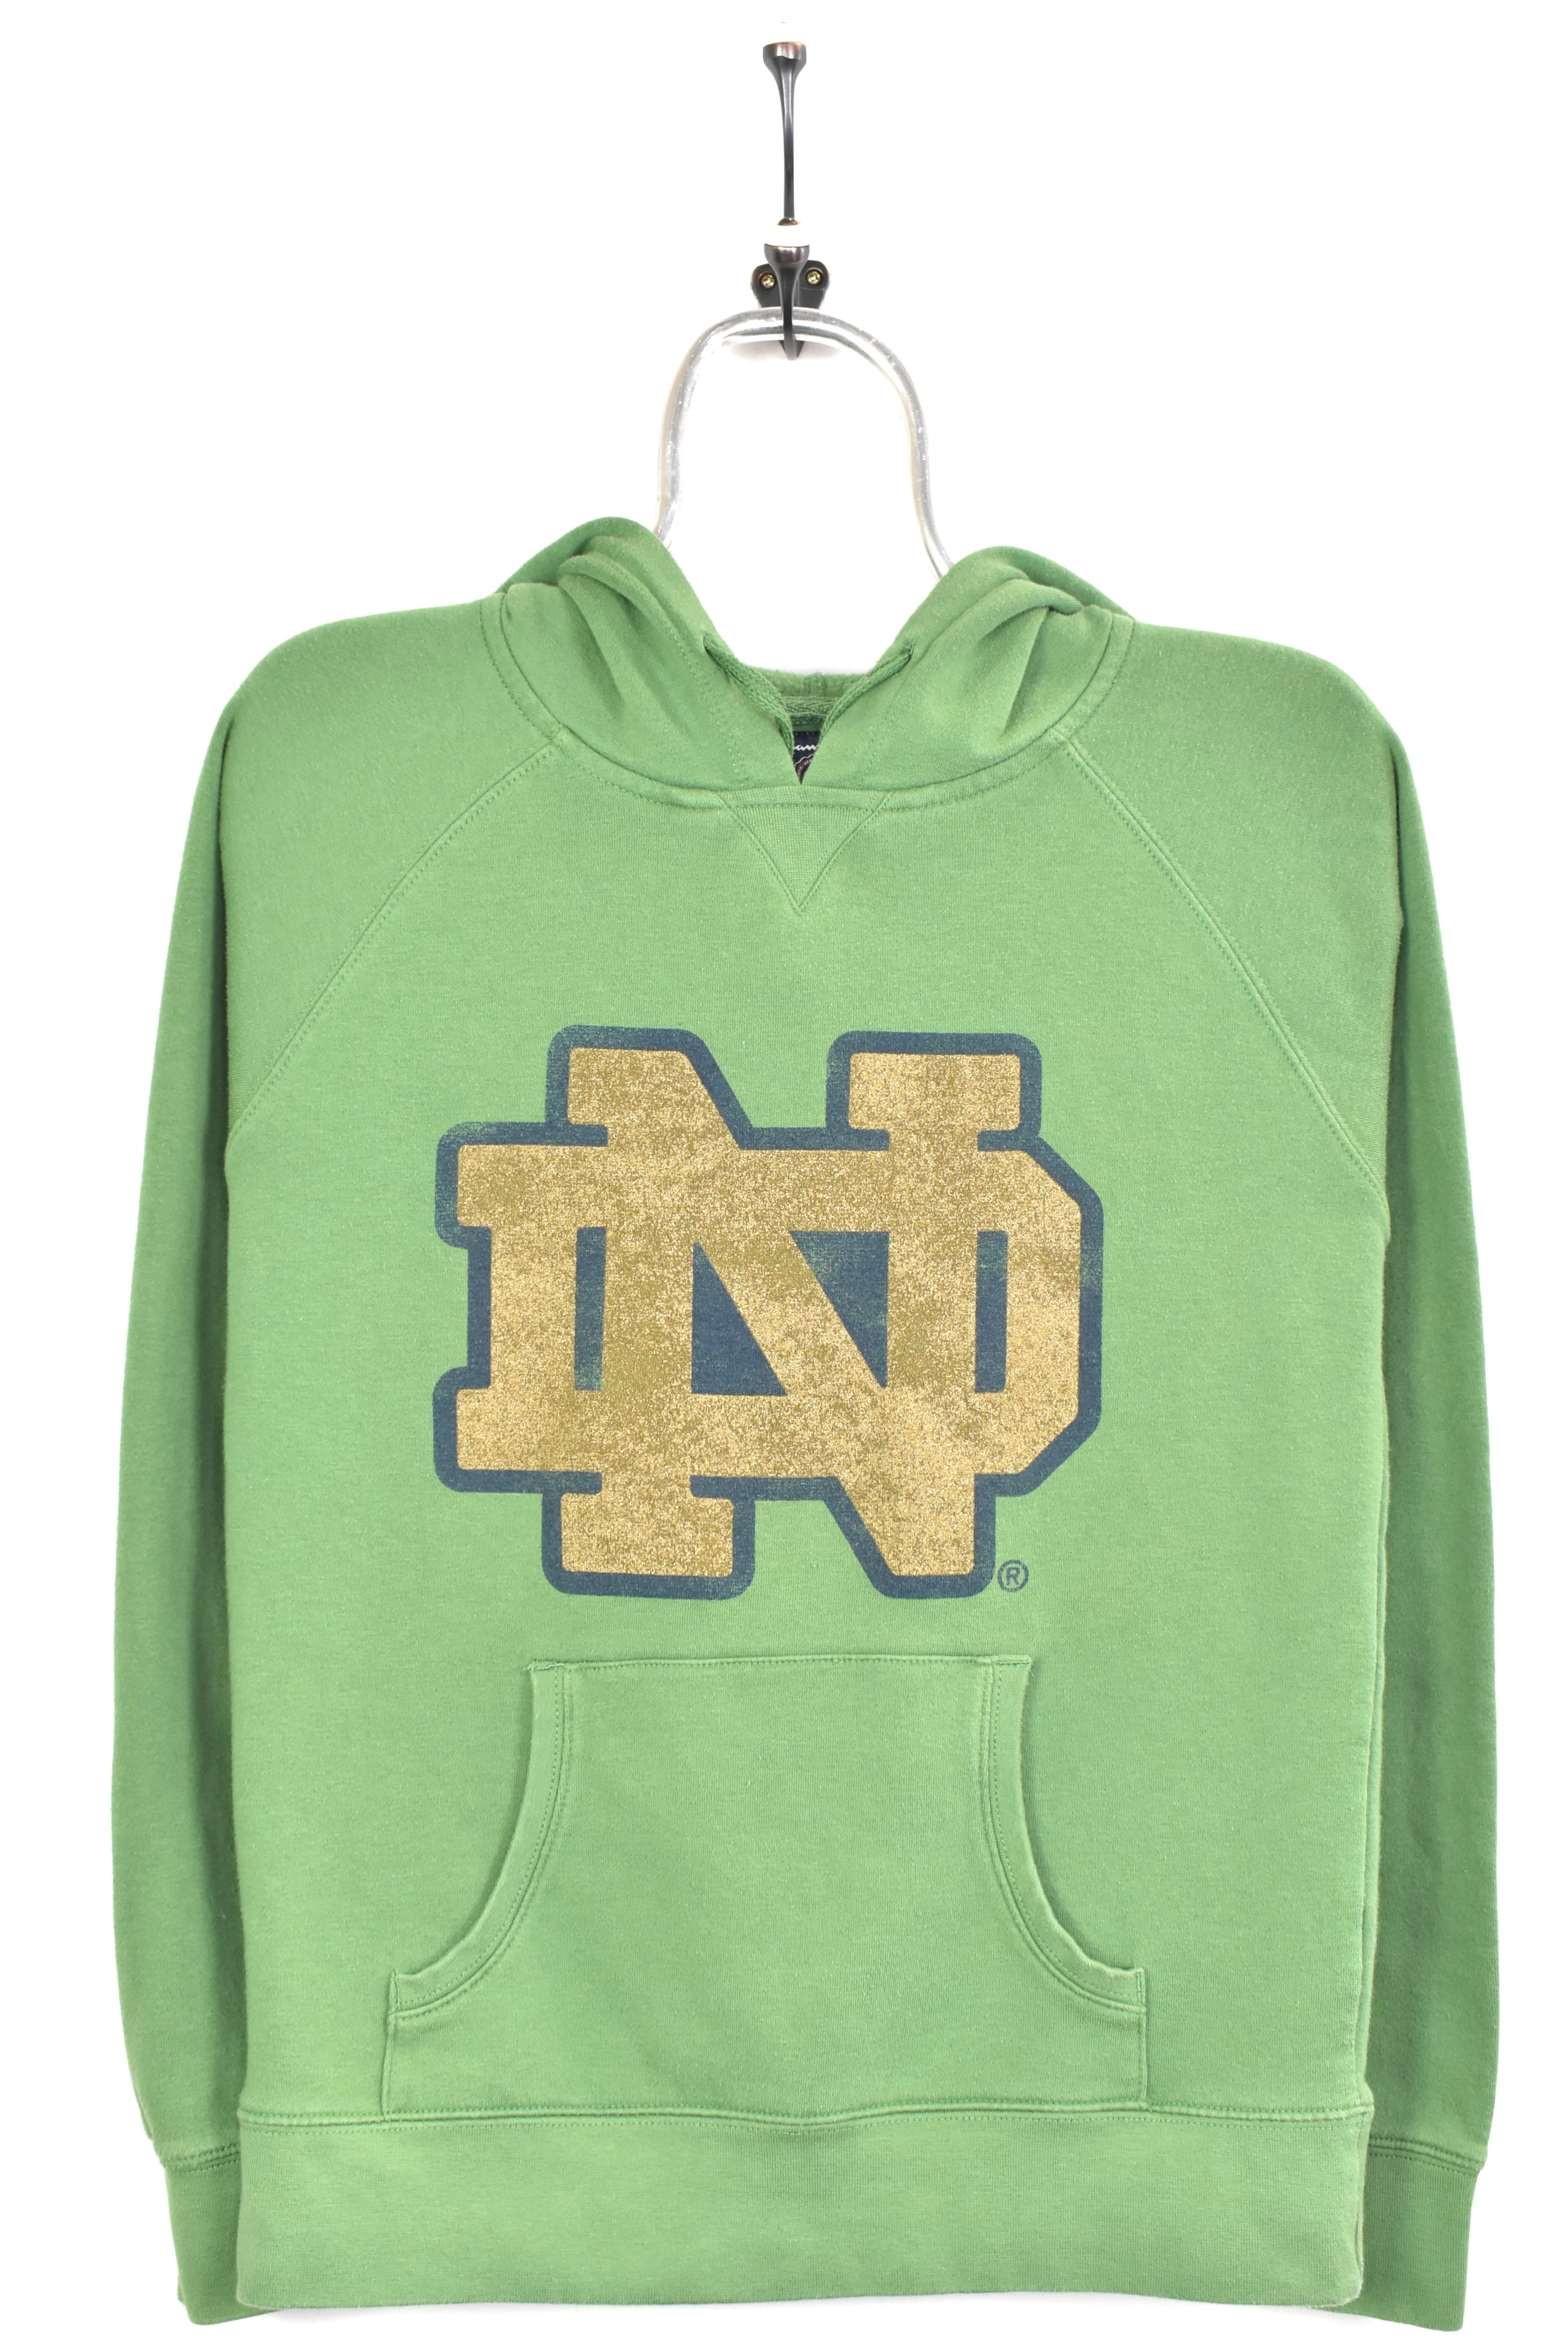 Vintage Notre Dame University green hoodie | Small COLLEGE